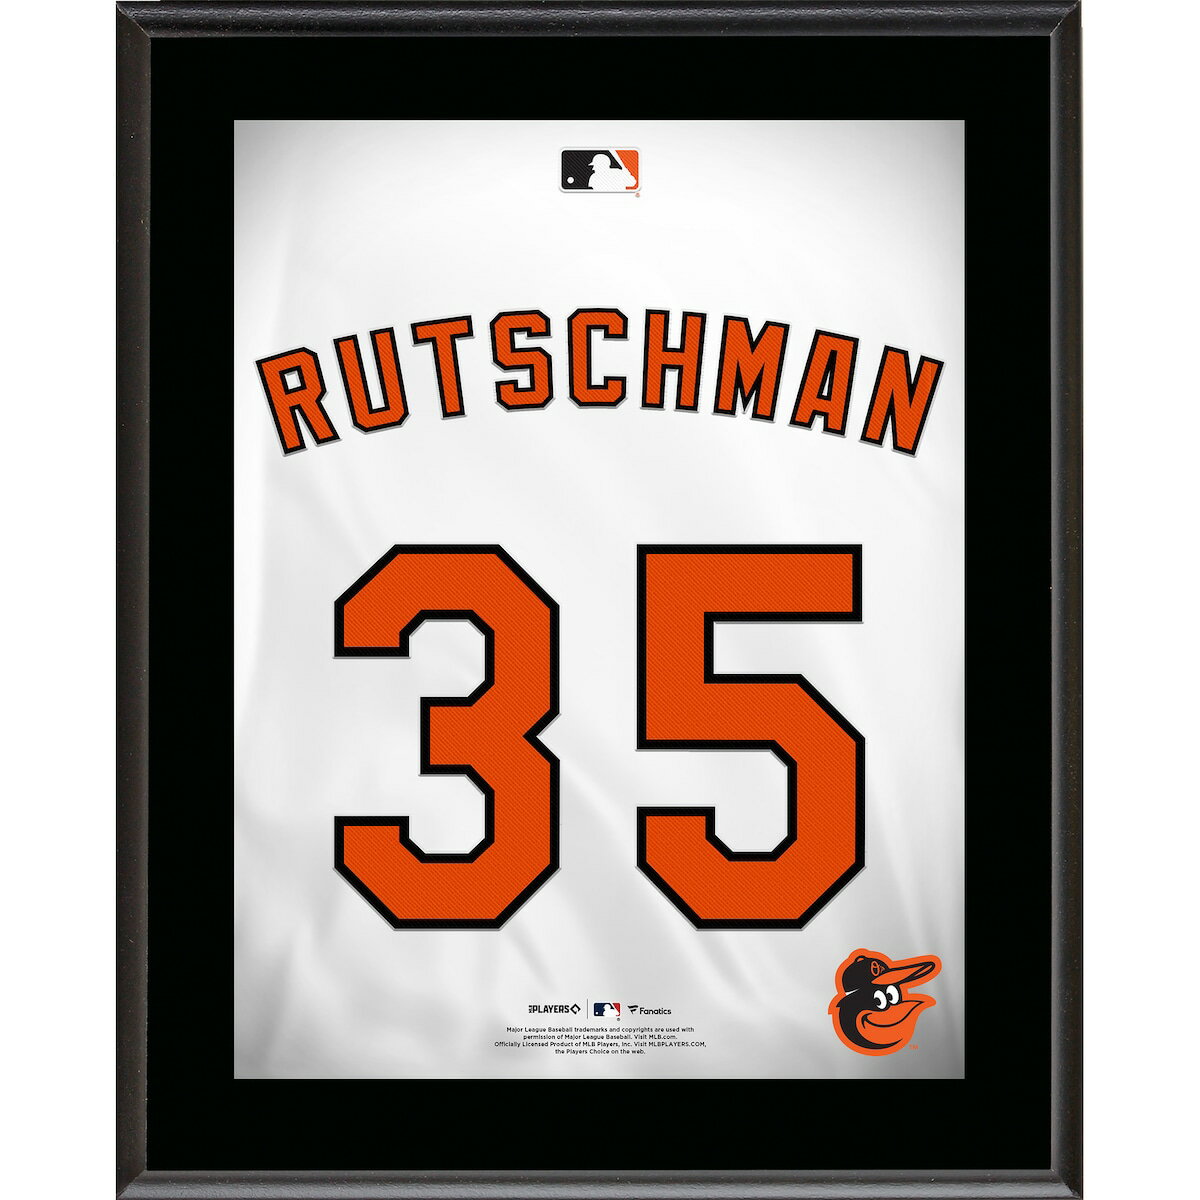 Adley Rutschman Baltimore Orioles 10.5" x 13" Jersey Number Sublimated Player Plaque